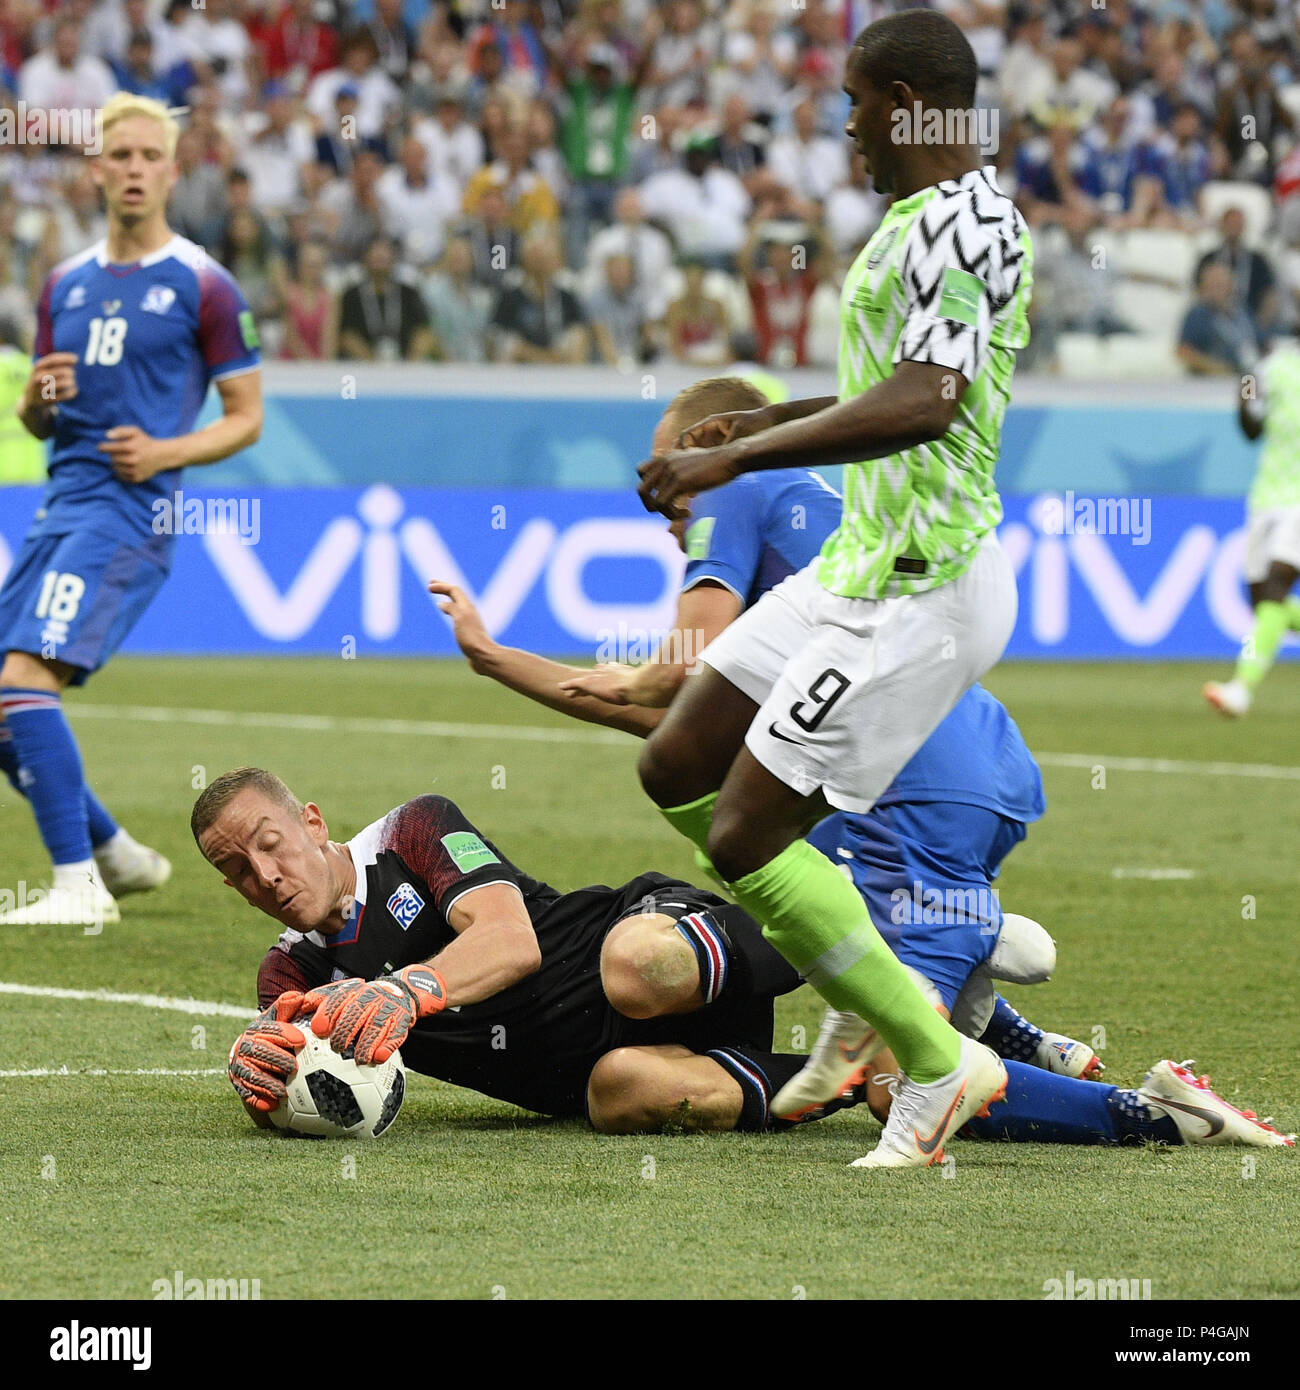 Volgograd, Russia. 22nd June, 2018. Iceland's goalkeeper Hannes Halldorsson (L bottom) defends during the 2018 FIFA World Cup Group D match between Nigeria and Iceland in Volgograd, Russia, June 22, 2018. Nigeria won 2-0. Credit: Lui Siu Wai/Xinhua/Alamy Live News Stock Photo